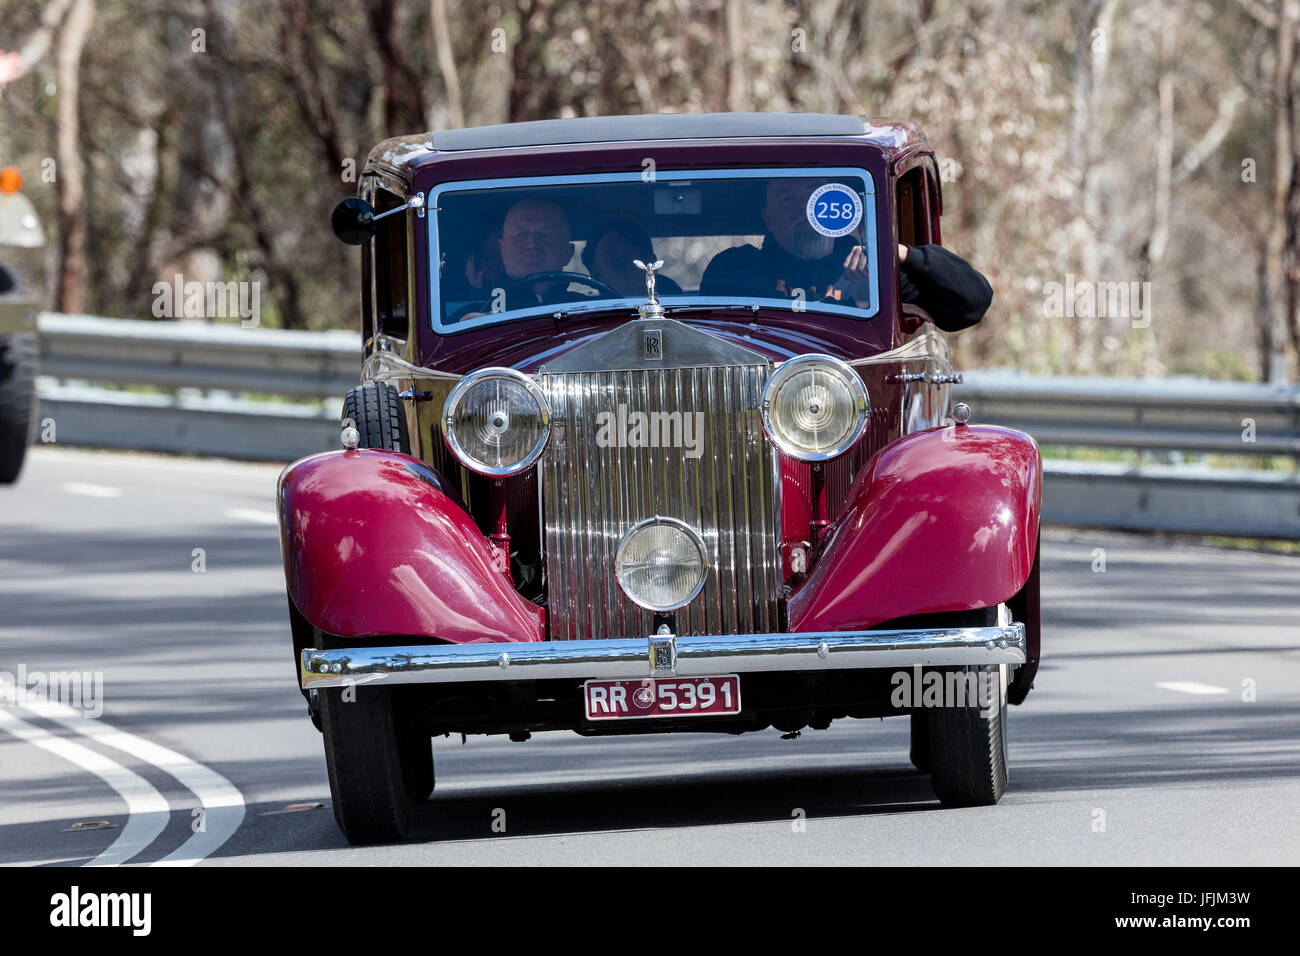 Vintage 1935 Rolls Royce 20/25 Sports driving on country roads near the town of Birdwood, South Australia. Stock Photo